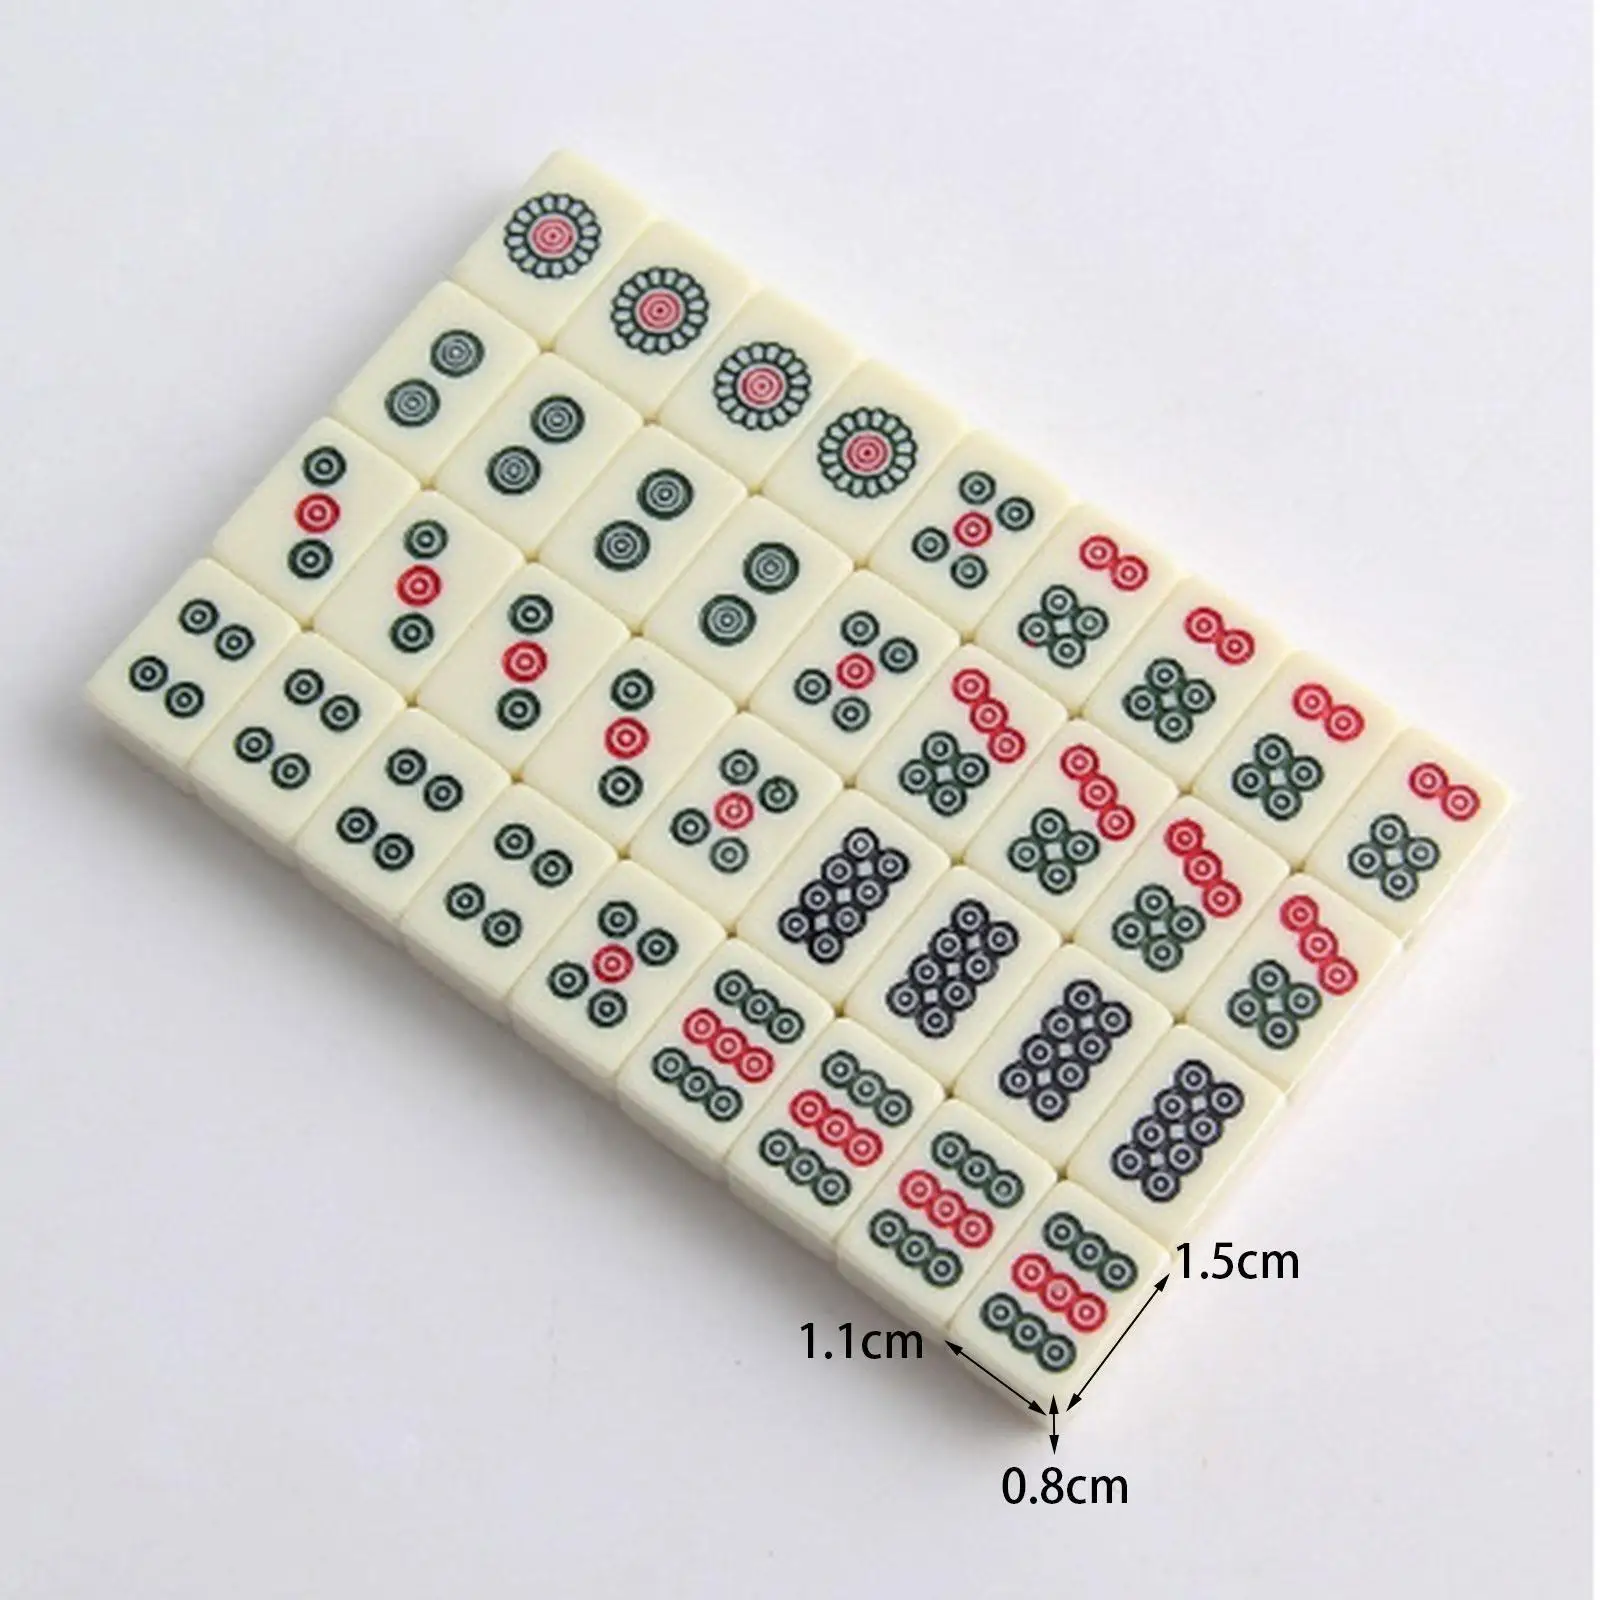 Portable Chinese Mini Mahjong Set Tiles Game with Storage Box for Party